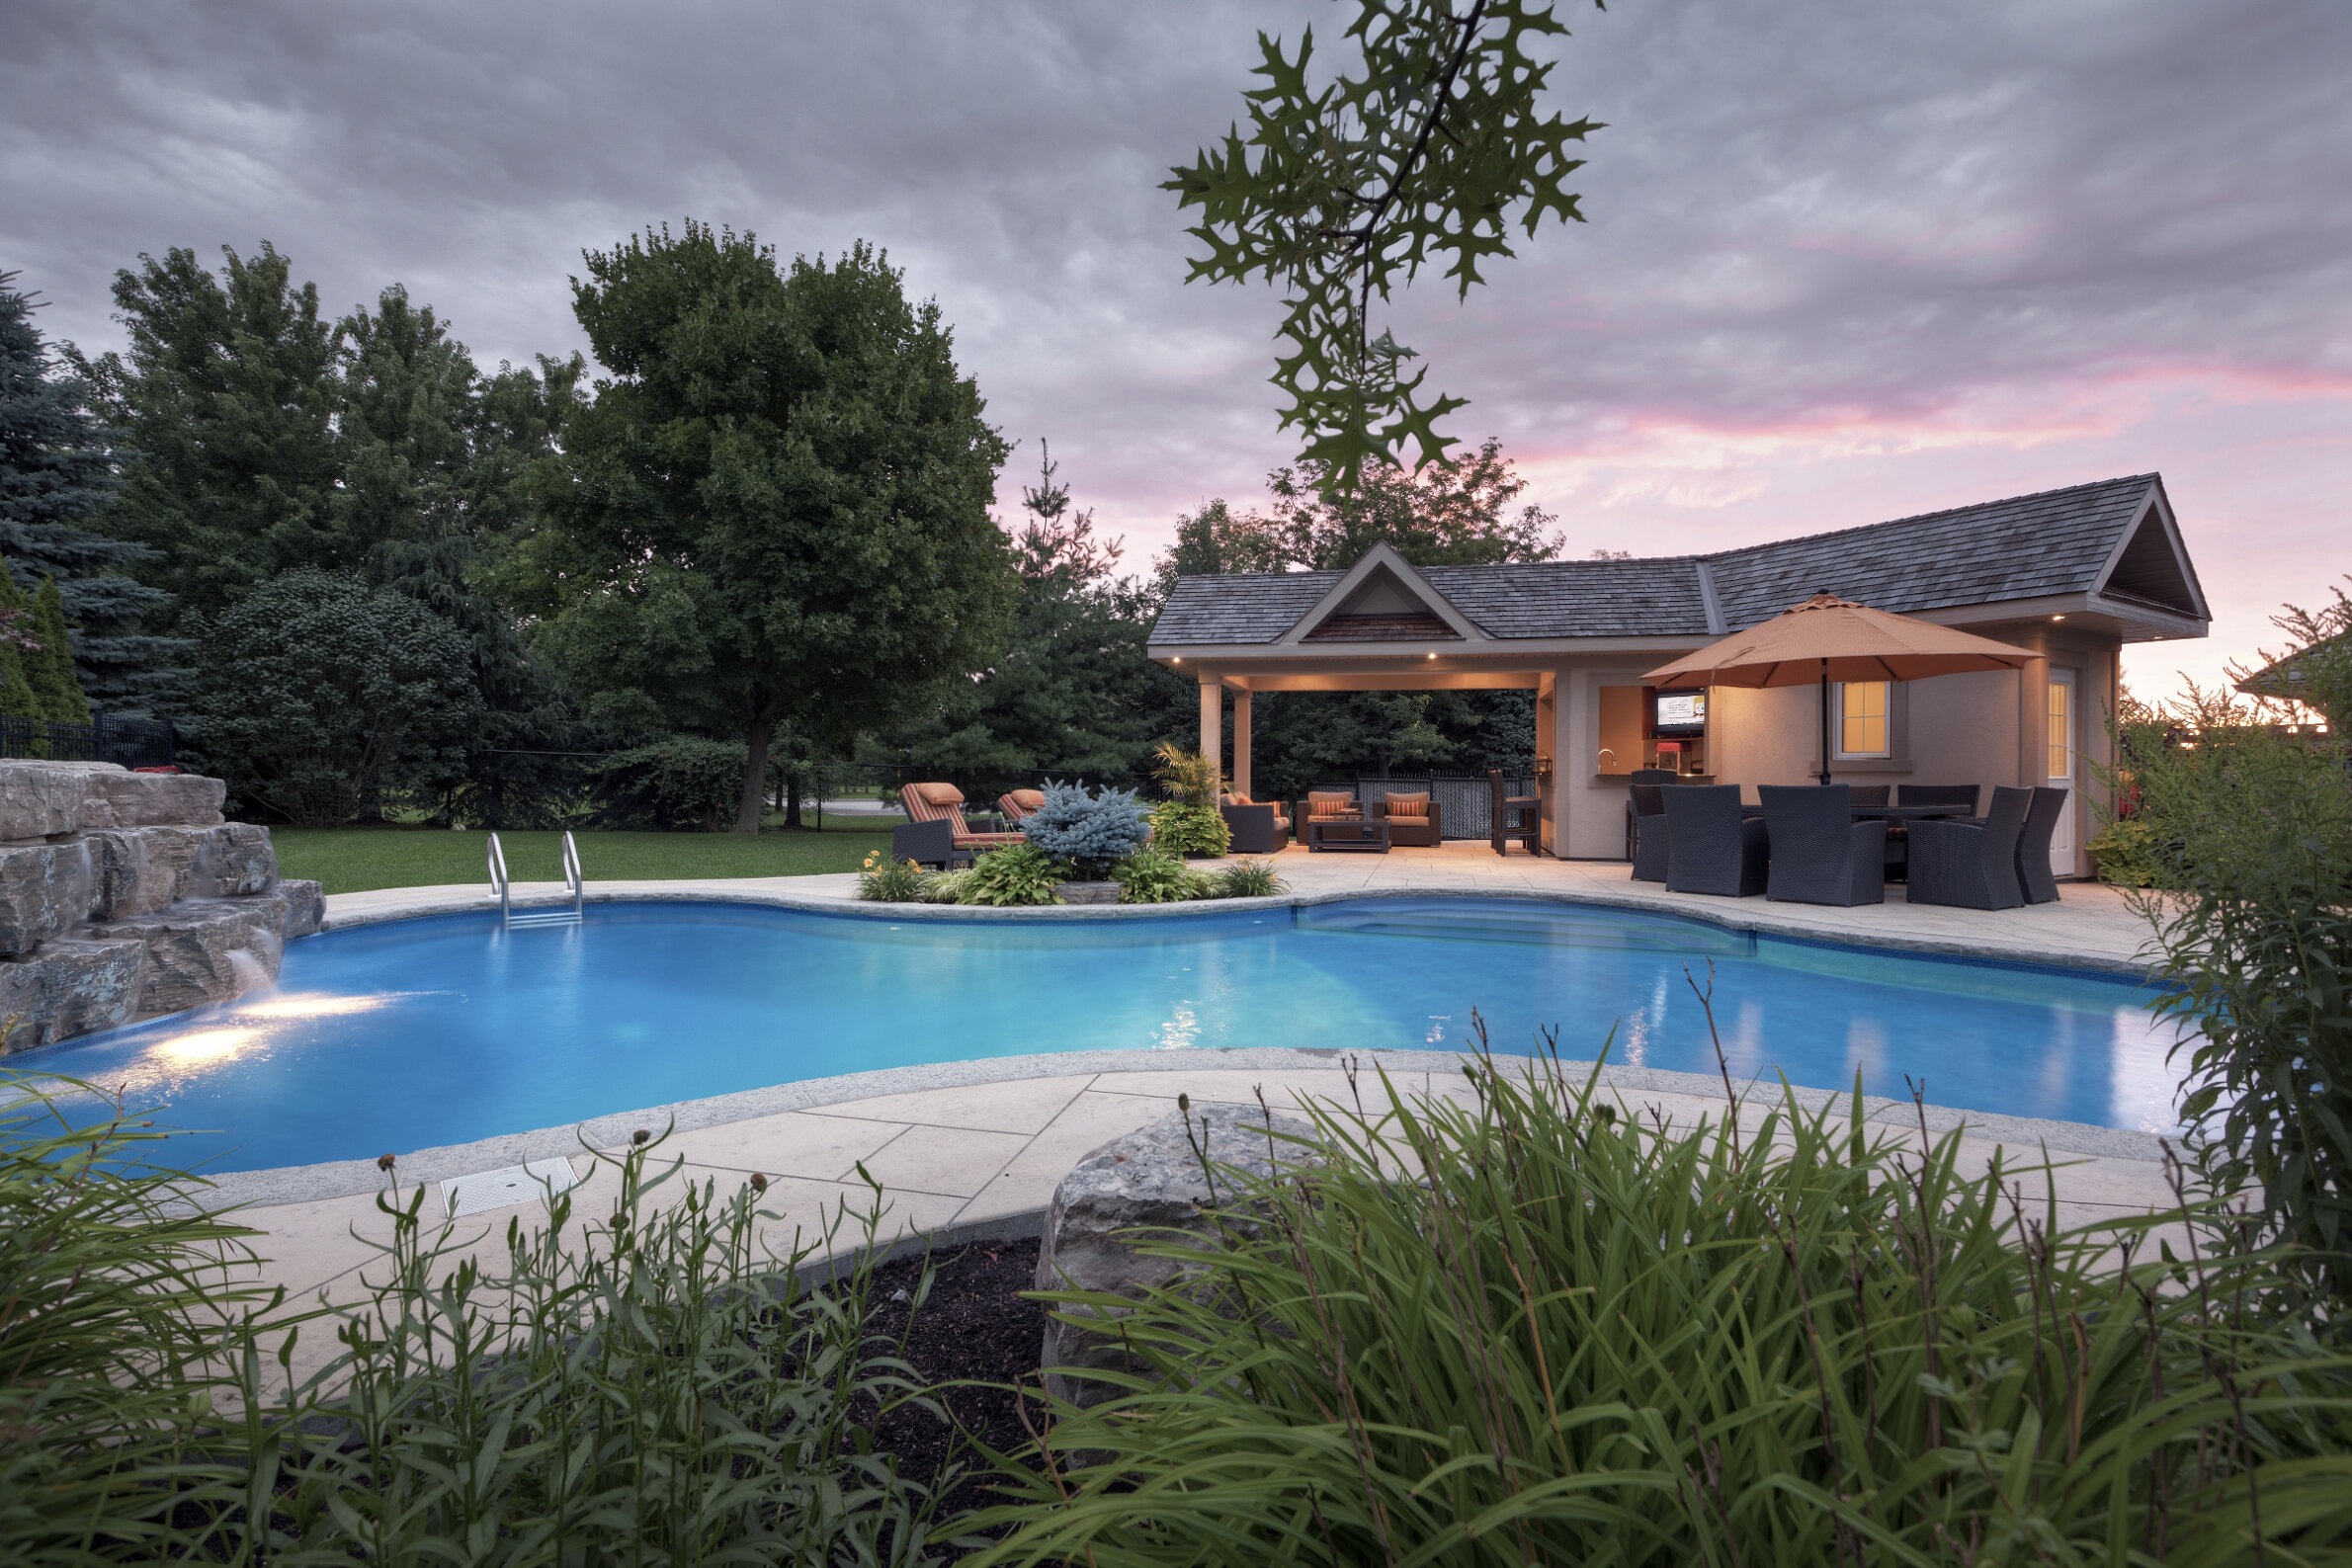 A serene backyard at dusk with an inviting swimming pool, adjacent covered patio with furniture, greenery, and a dramatic twilight sky above.